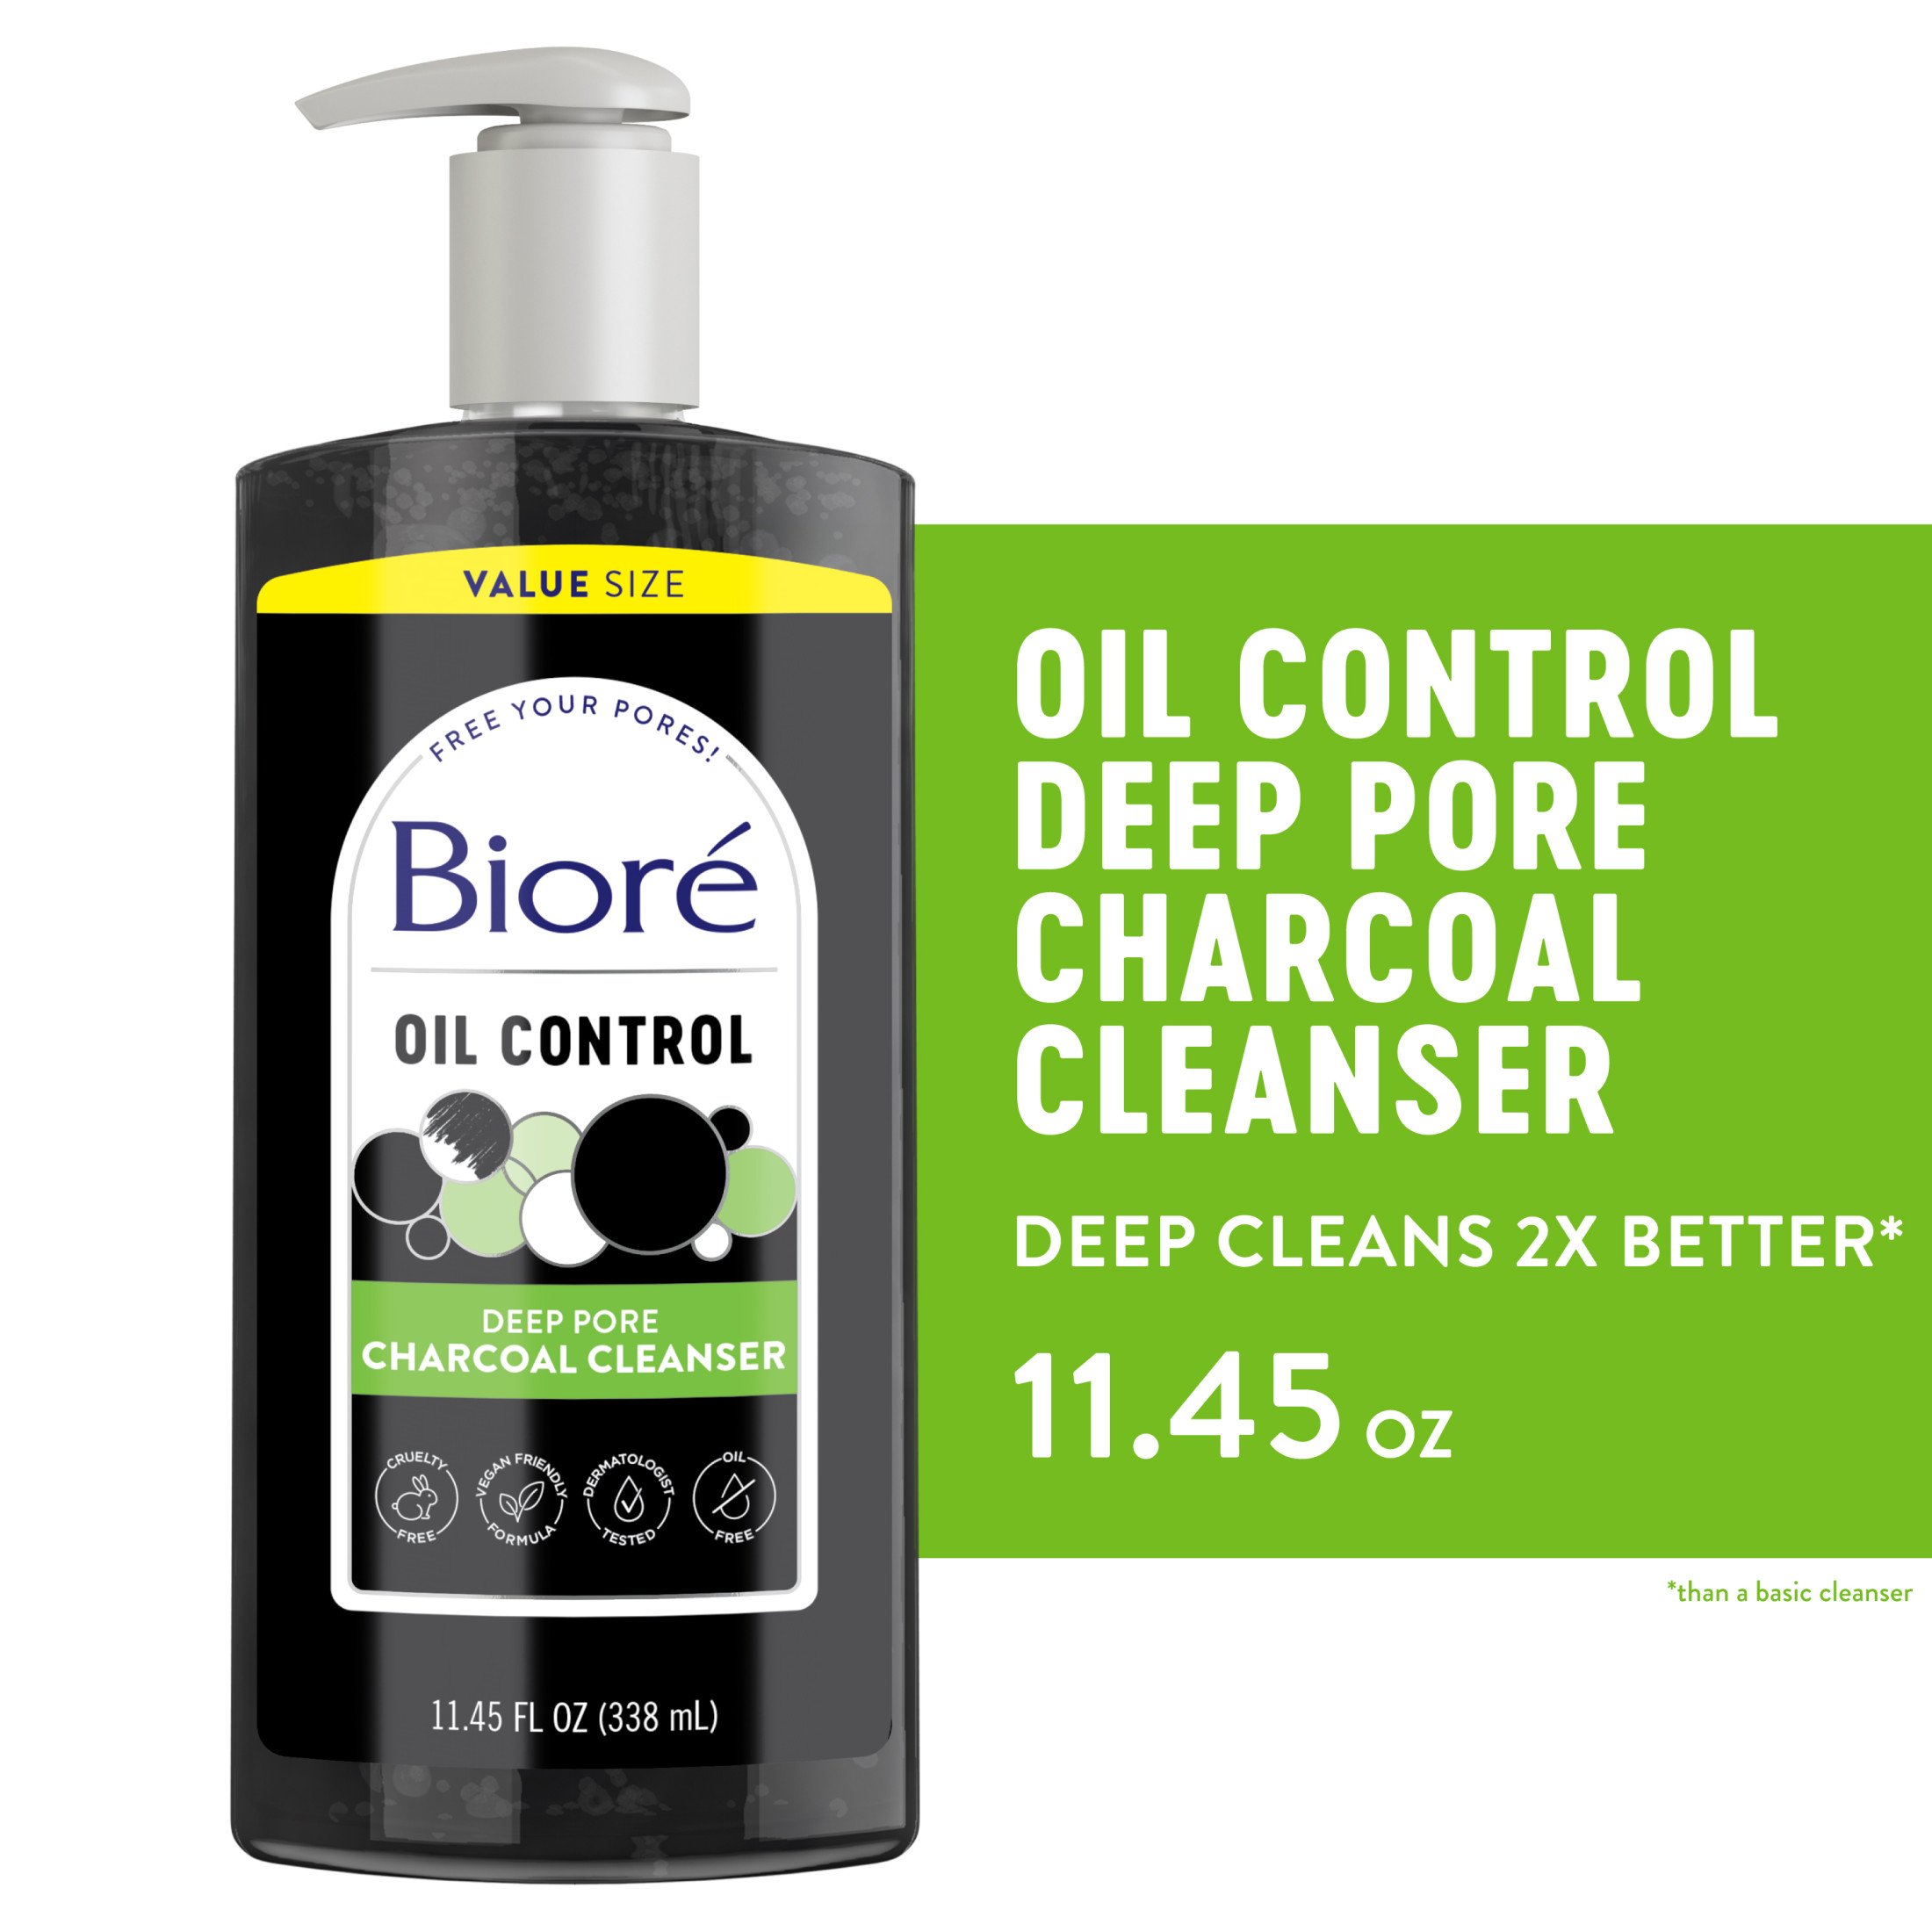 Biore Deep Pore Charcoal Face Wash, Daily Facial Cleanser for Dirt & Makeup Removal, for Oily Skin, 11.45 oz - image 1 of 10